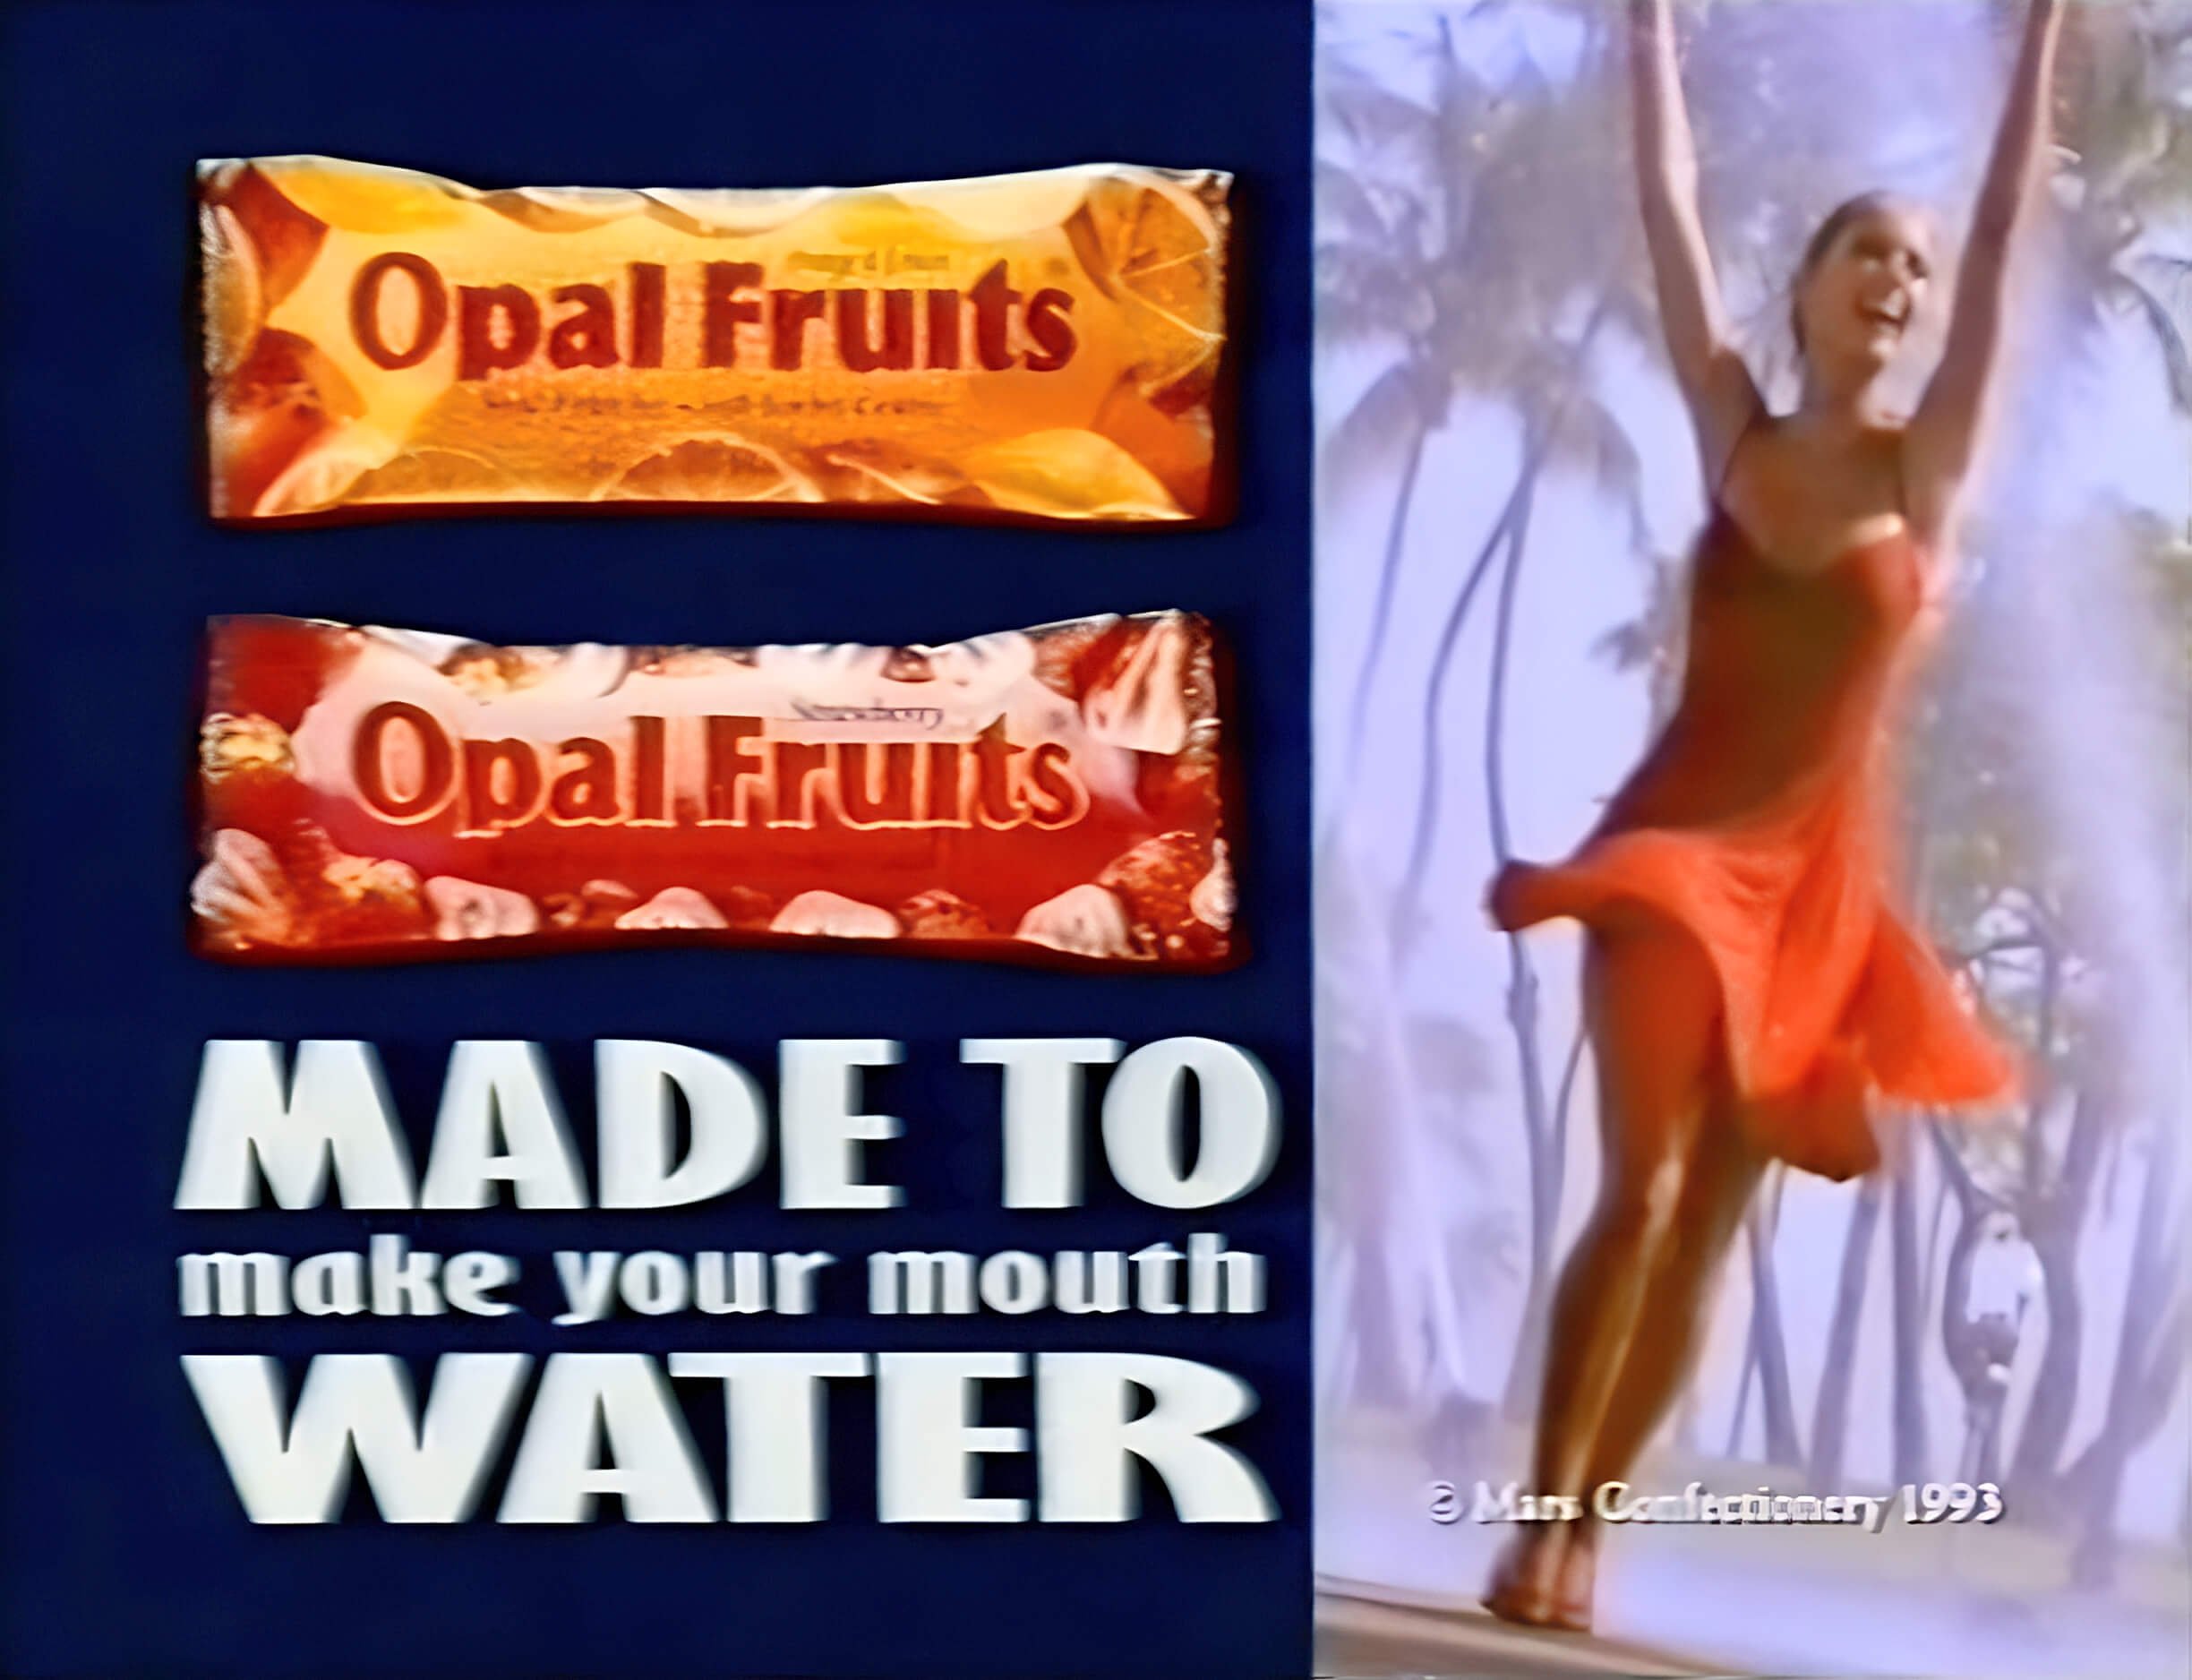 Opal Fruits Ice advert screenshot from TV ad (1993). Left: Two Opal Fruits Ice products with Made To Make Your Mouth Water tagline. Right: Woman in red dress with arms in the air.